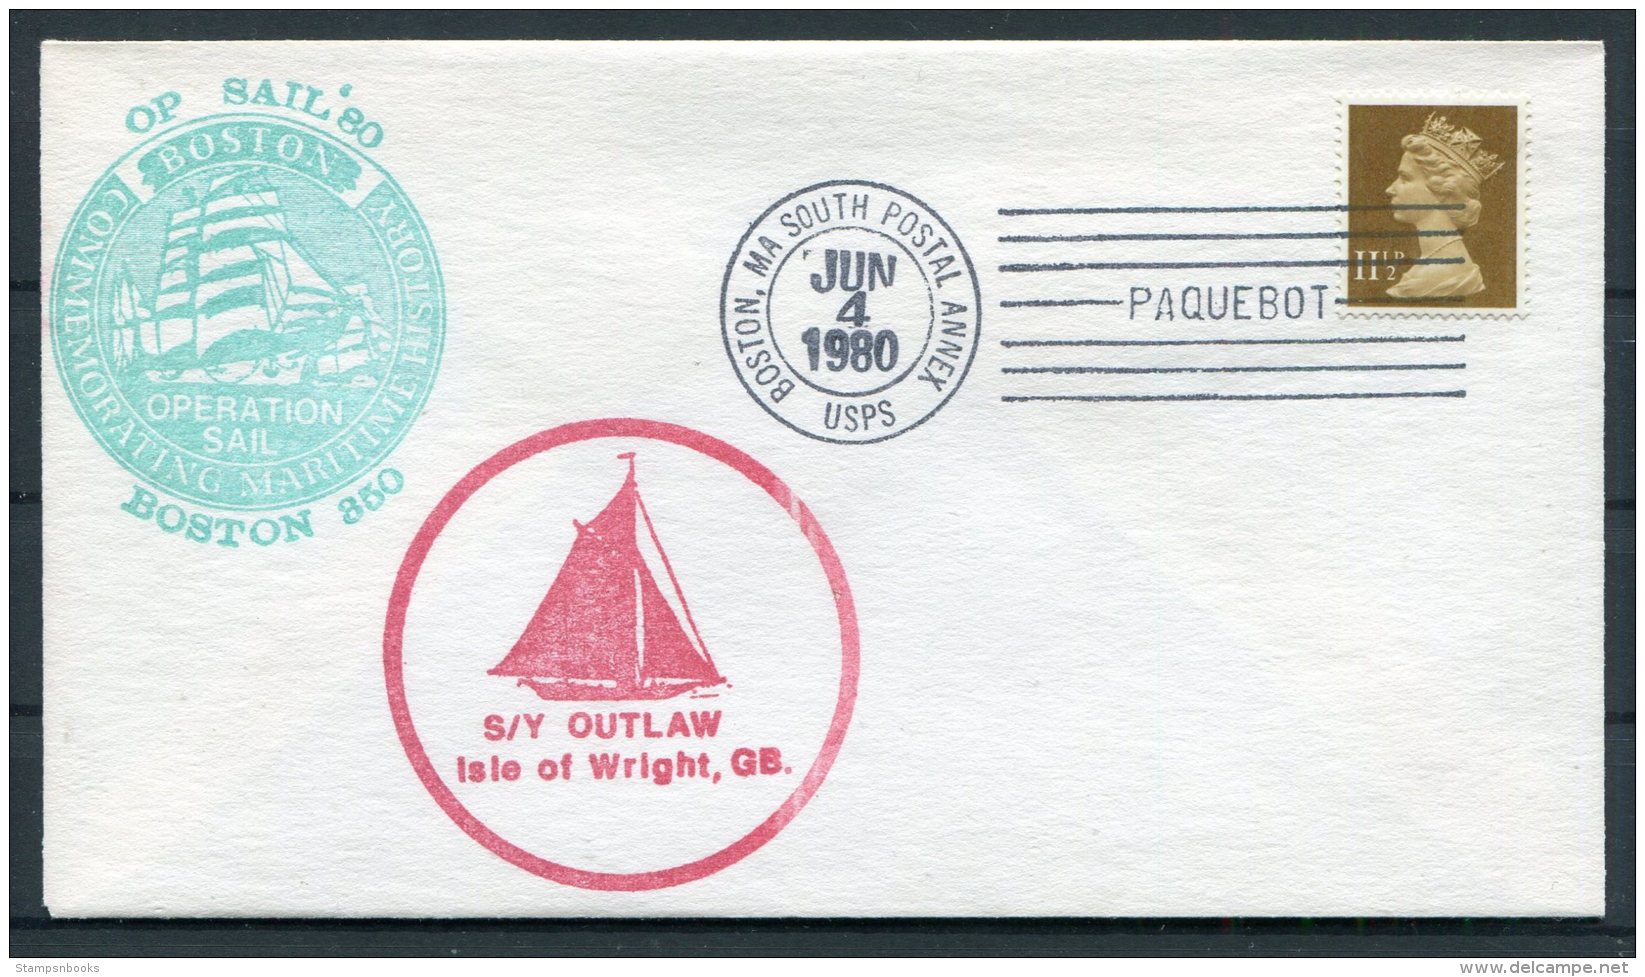 1980 GB S/Y OUTLAW, Isle Of Wright Sailing Ship Cover. Boston Operation Sail '82 PAQUEBOT - Covers & Documents